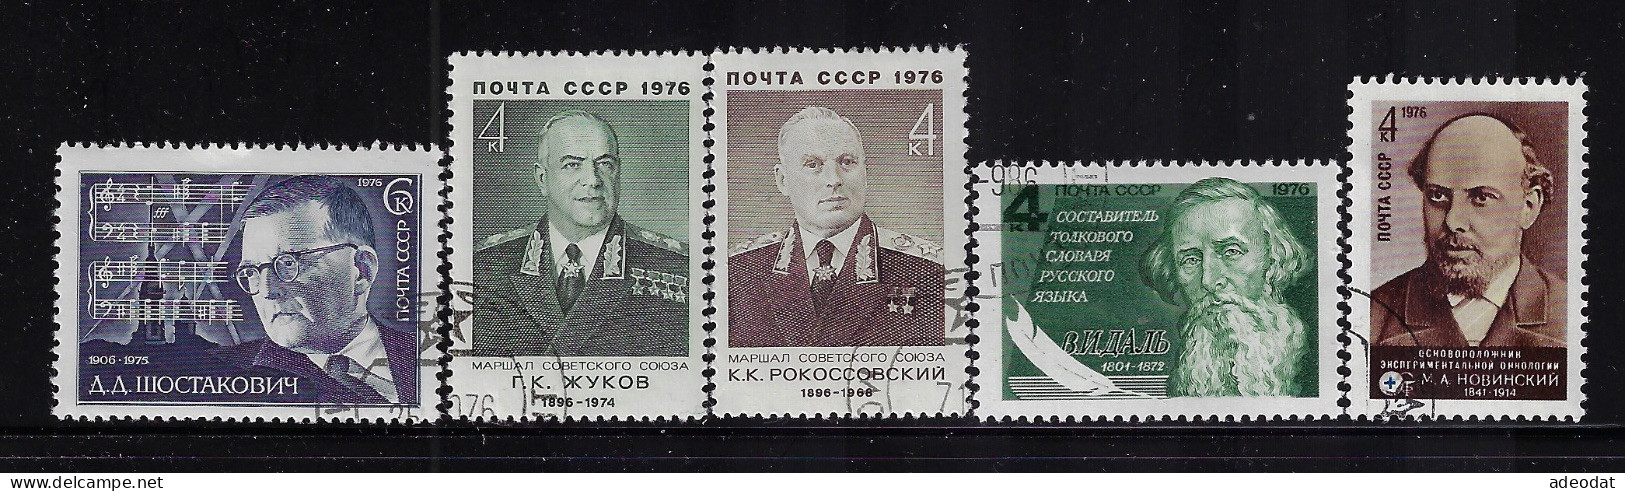 RUSSIA  1976  SCOTT #4486-4488,4494,4498  USED - Used Stamps